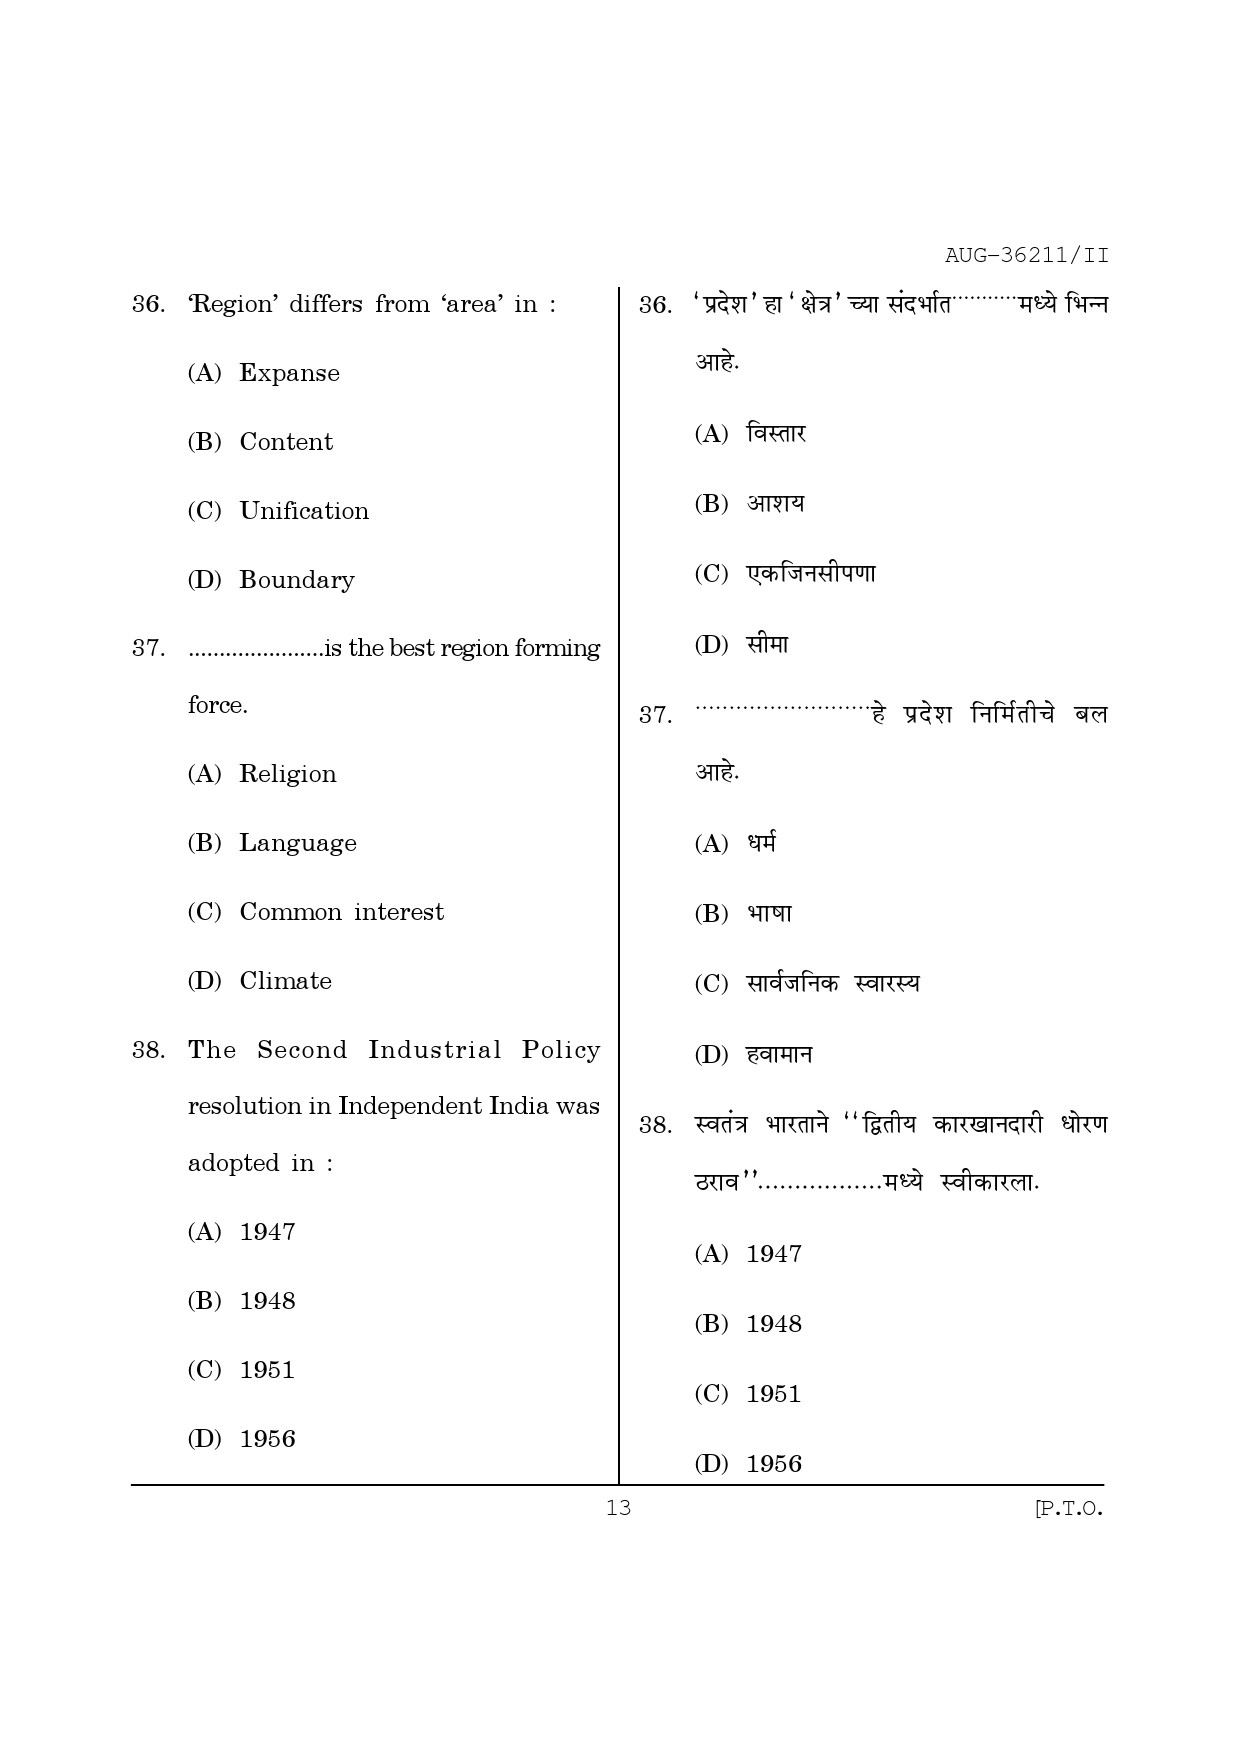 Maharashtra SET Geography Question Paper II August 2011 13